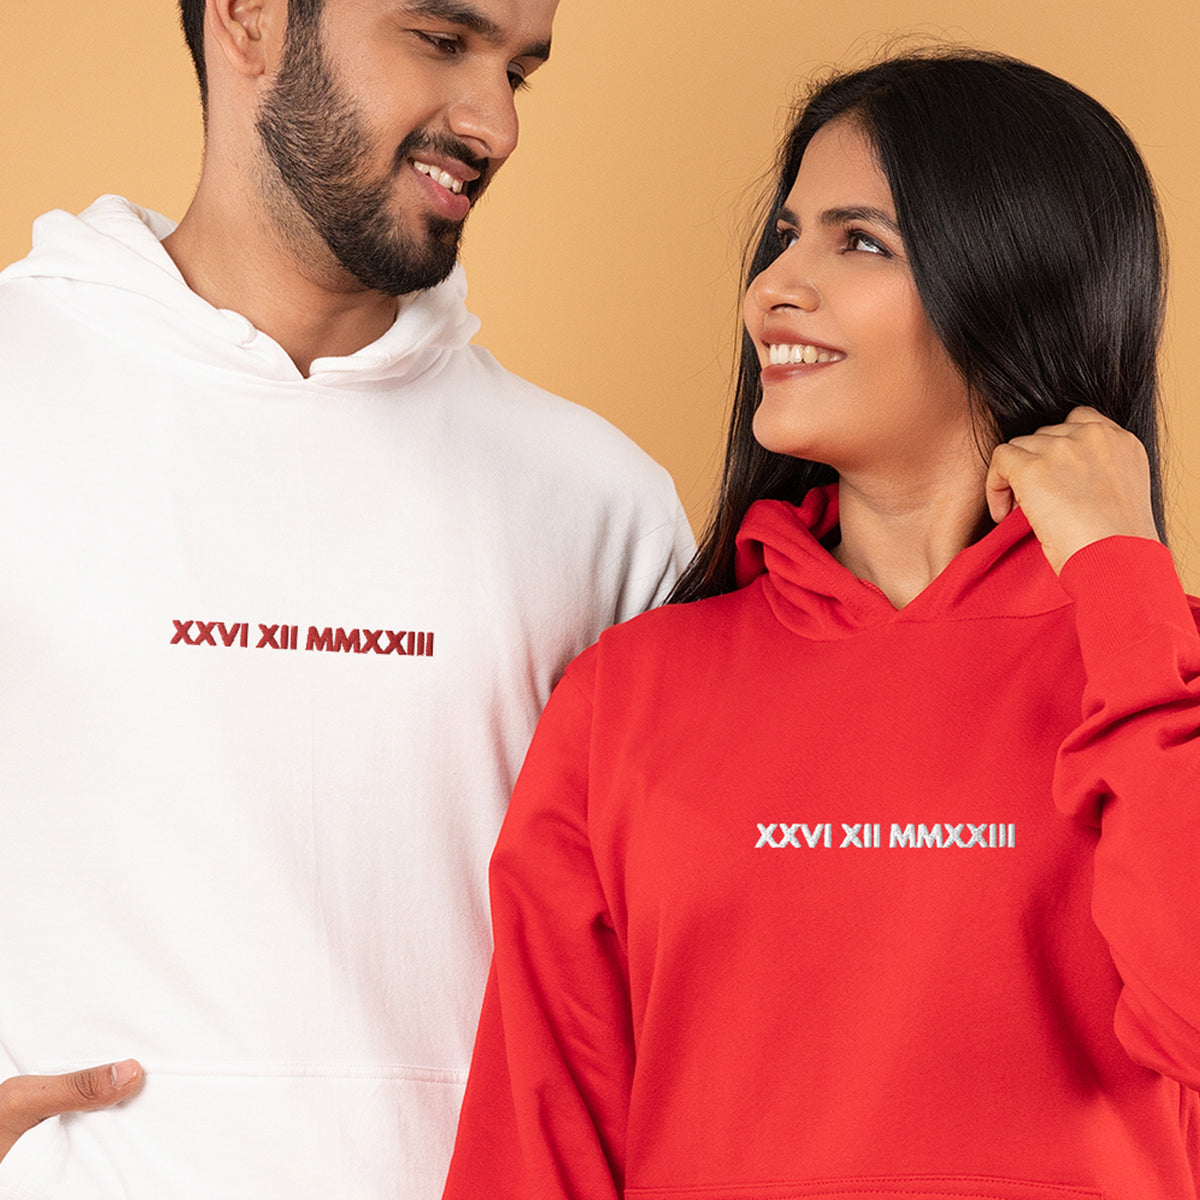 roman-wedding-date-personalised-red-white-embroidered-couple-hoodies-gogirgit-com-1